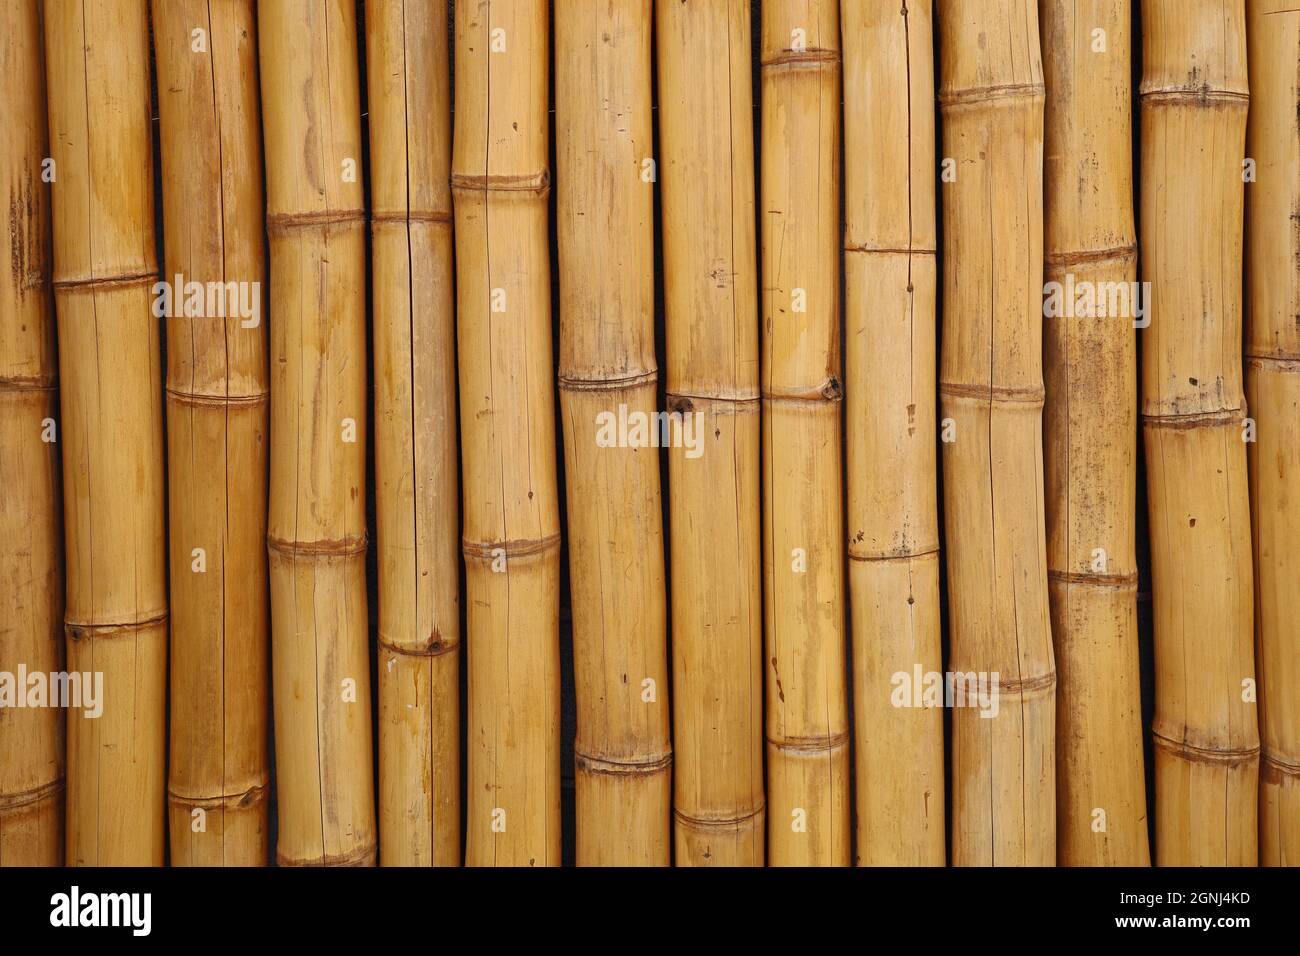 yellow bamboo fence background, vertical bamboo texture Stock Photo